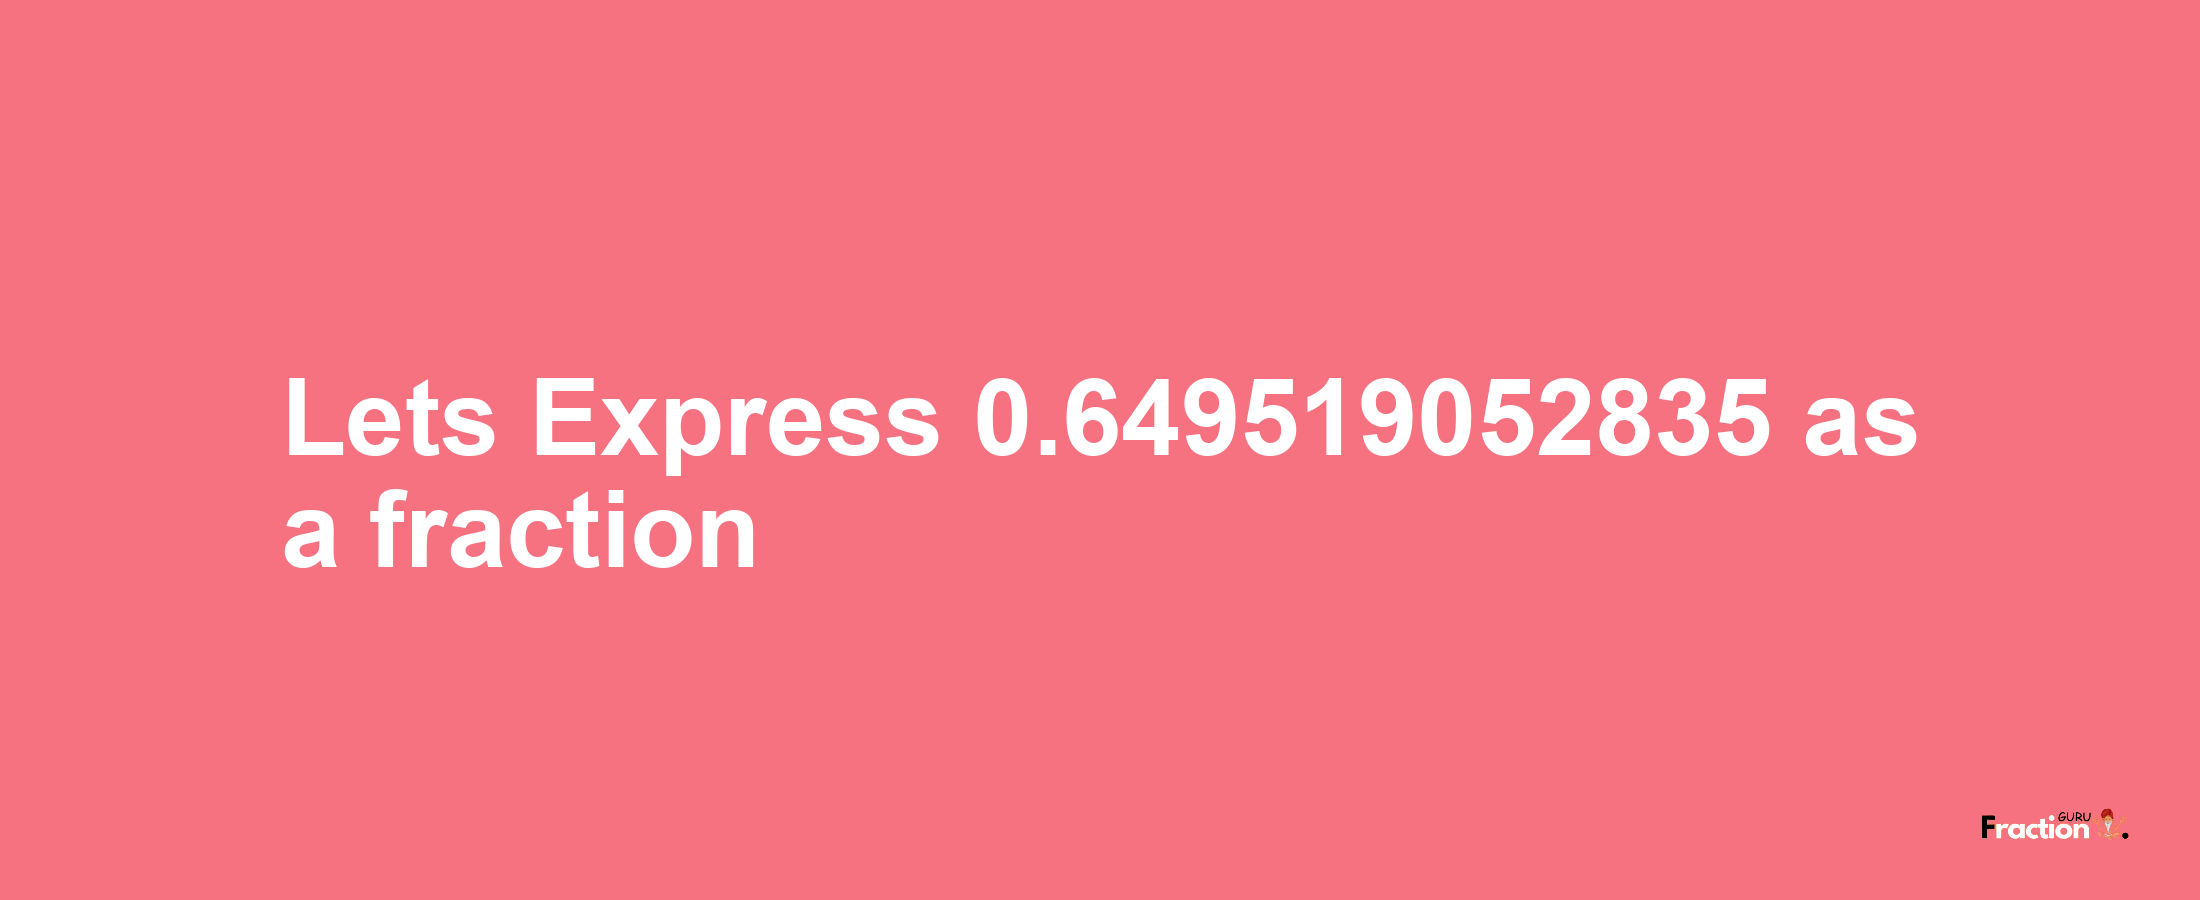 Lets Express 0.649519052835 as afraction